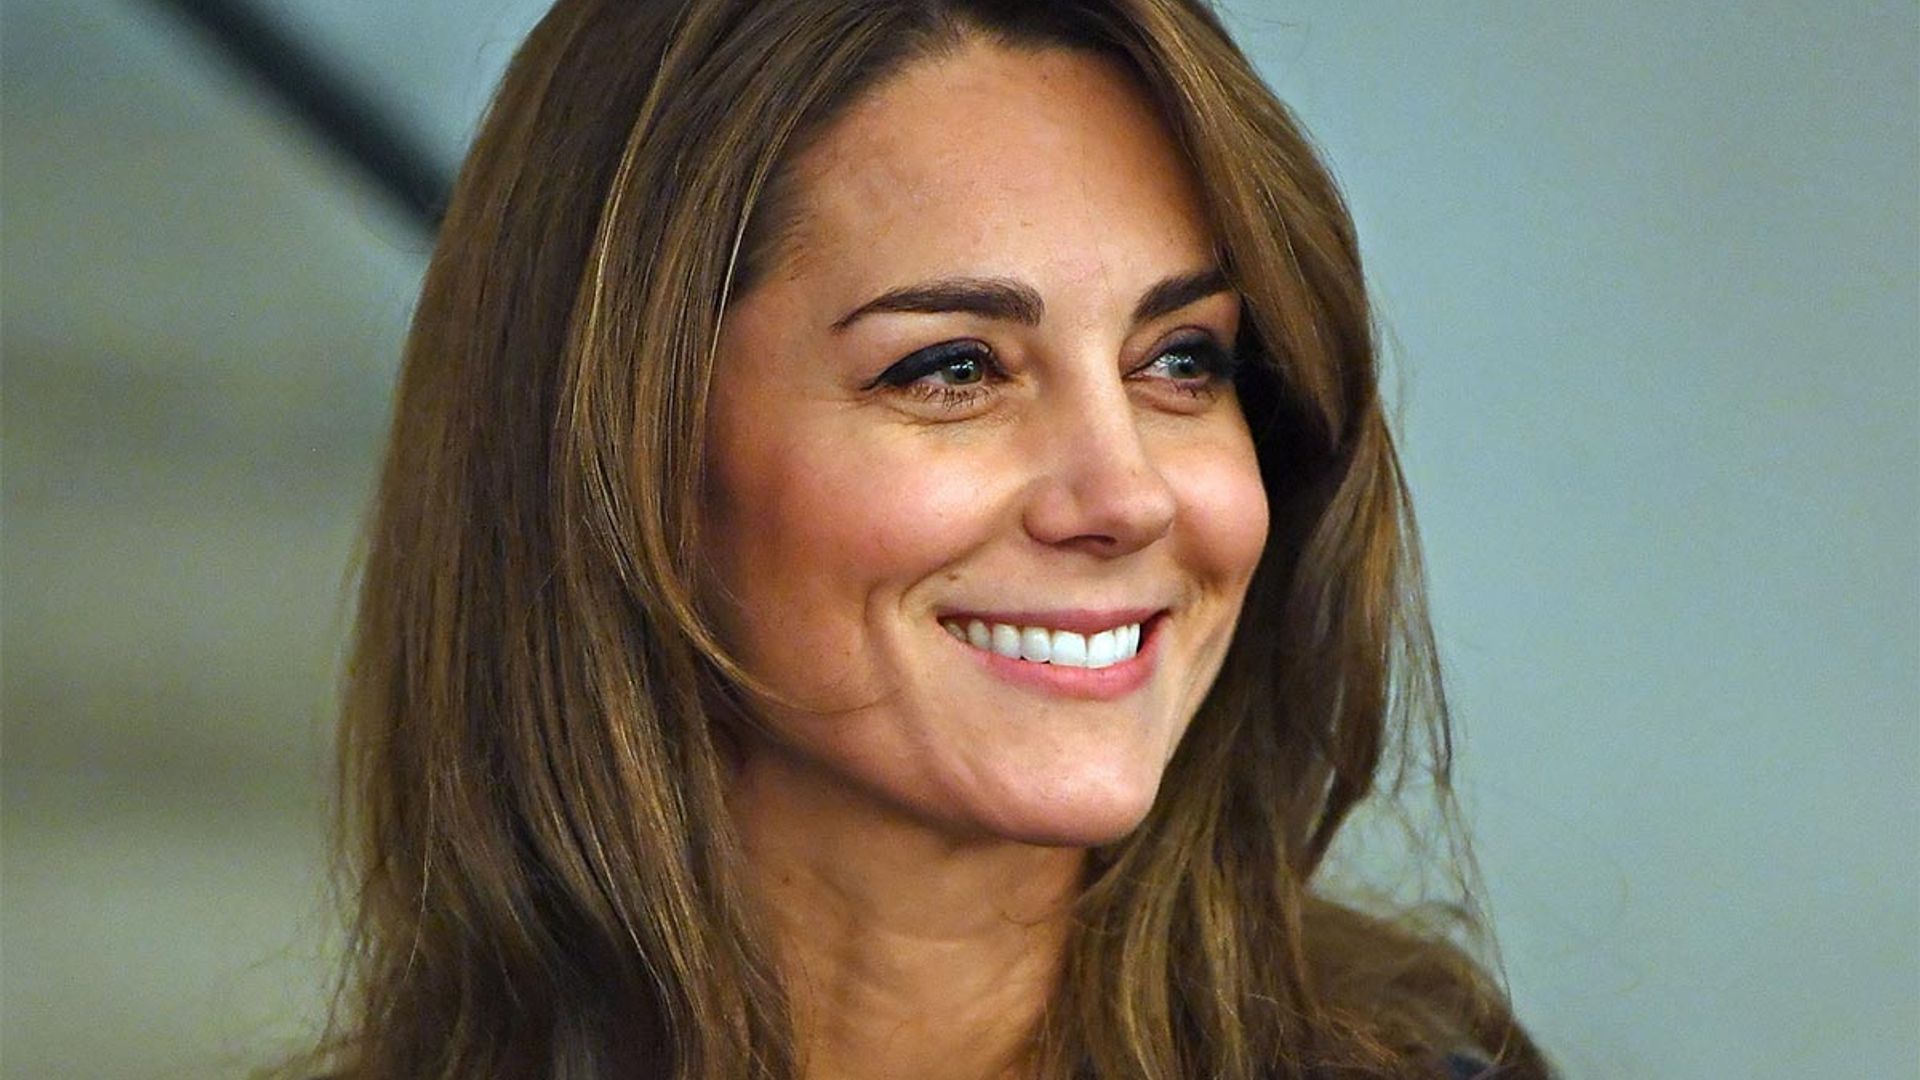 Kate Middleton's stunning new jewel has an incredible story behind it